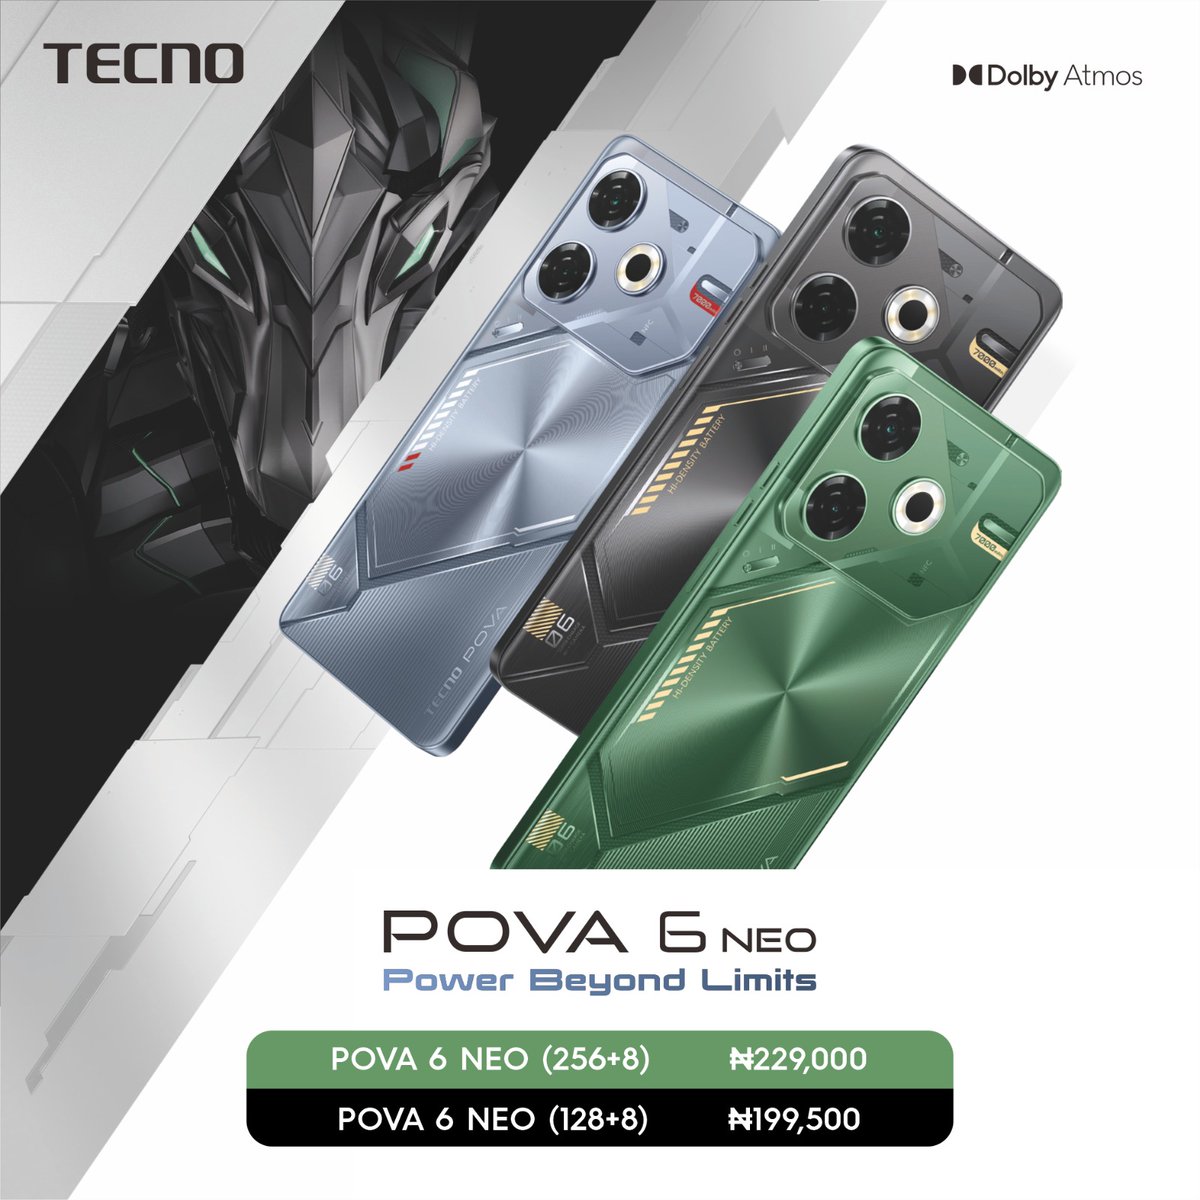 The TECNO POVA 6 NEO is available in all our stores nationwide for a RRP of NGN229,000 (256 +8) and NGN199,500 (128 +8) 

To see stores near you, click here: tecno-mobile.com/nga/store

#POVA6Neo #TECNOPova6Neo #PowerBeyondLimits